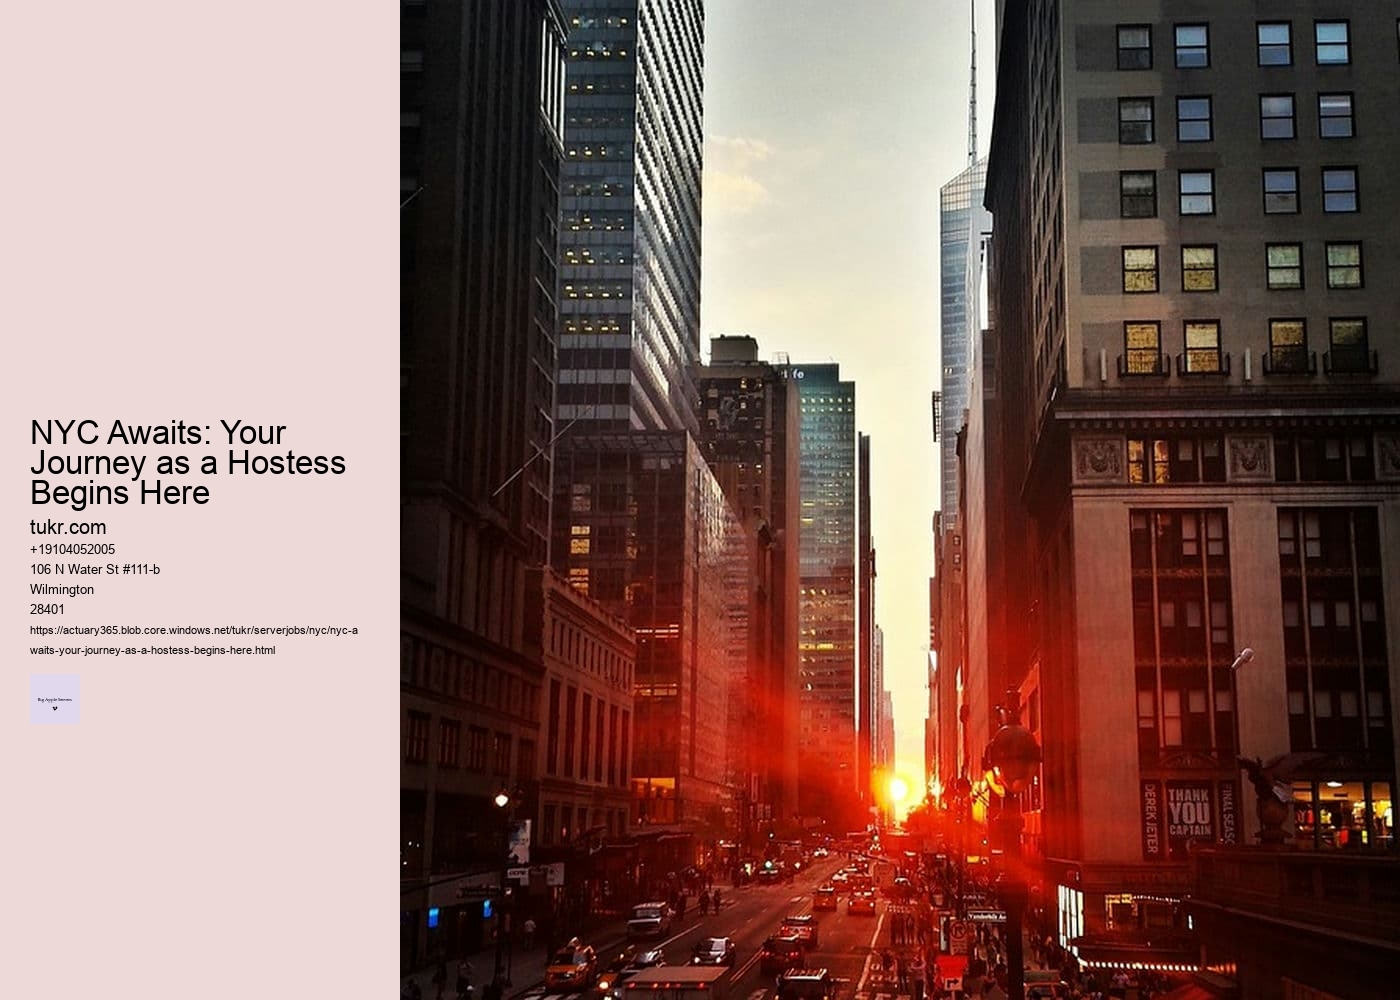 NYC Awaits: Your Journey as a Hostess Begins Here